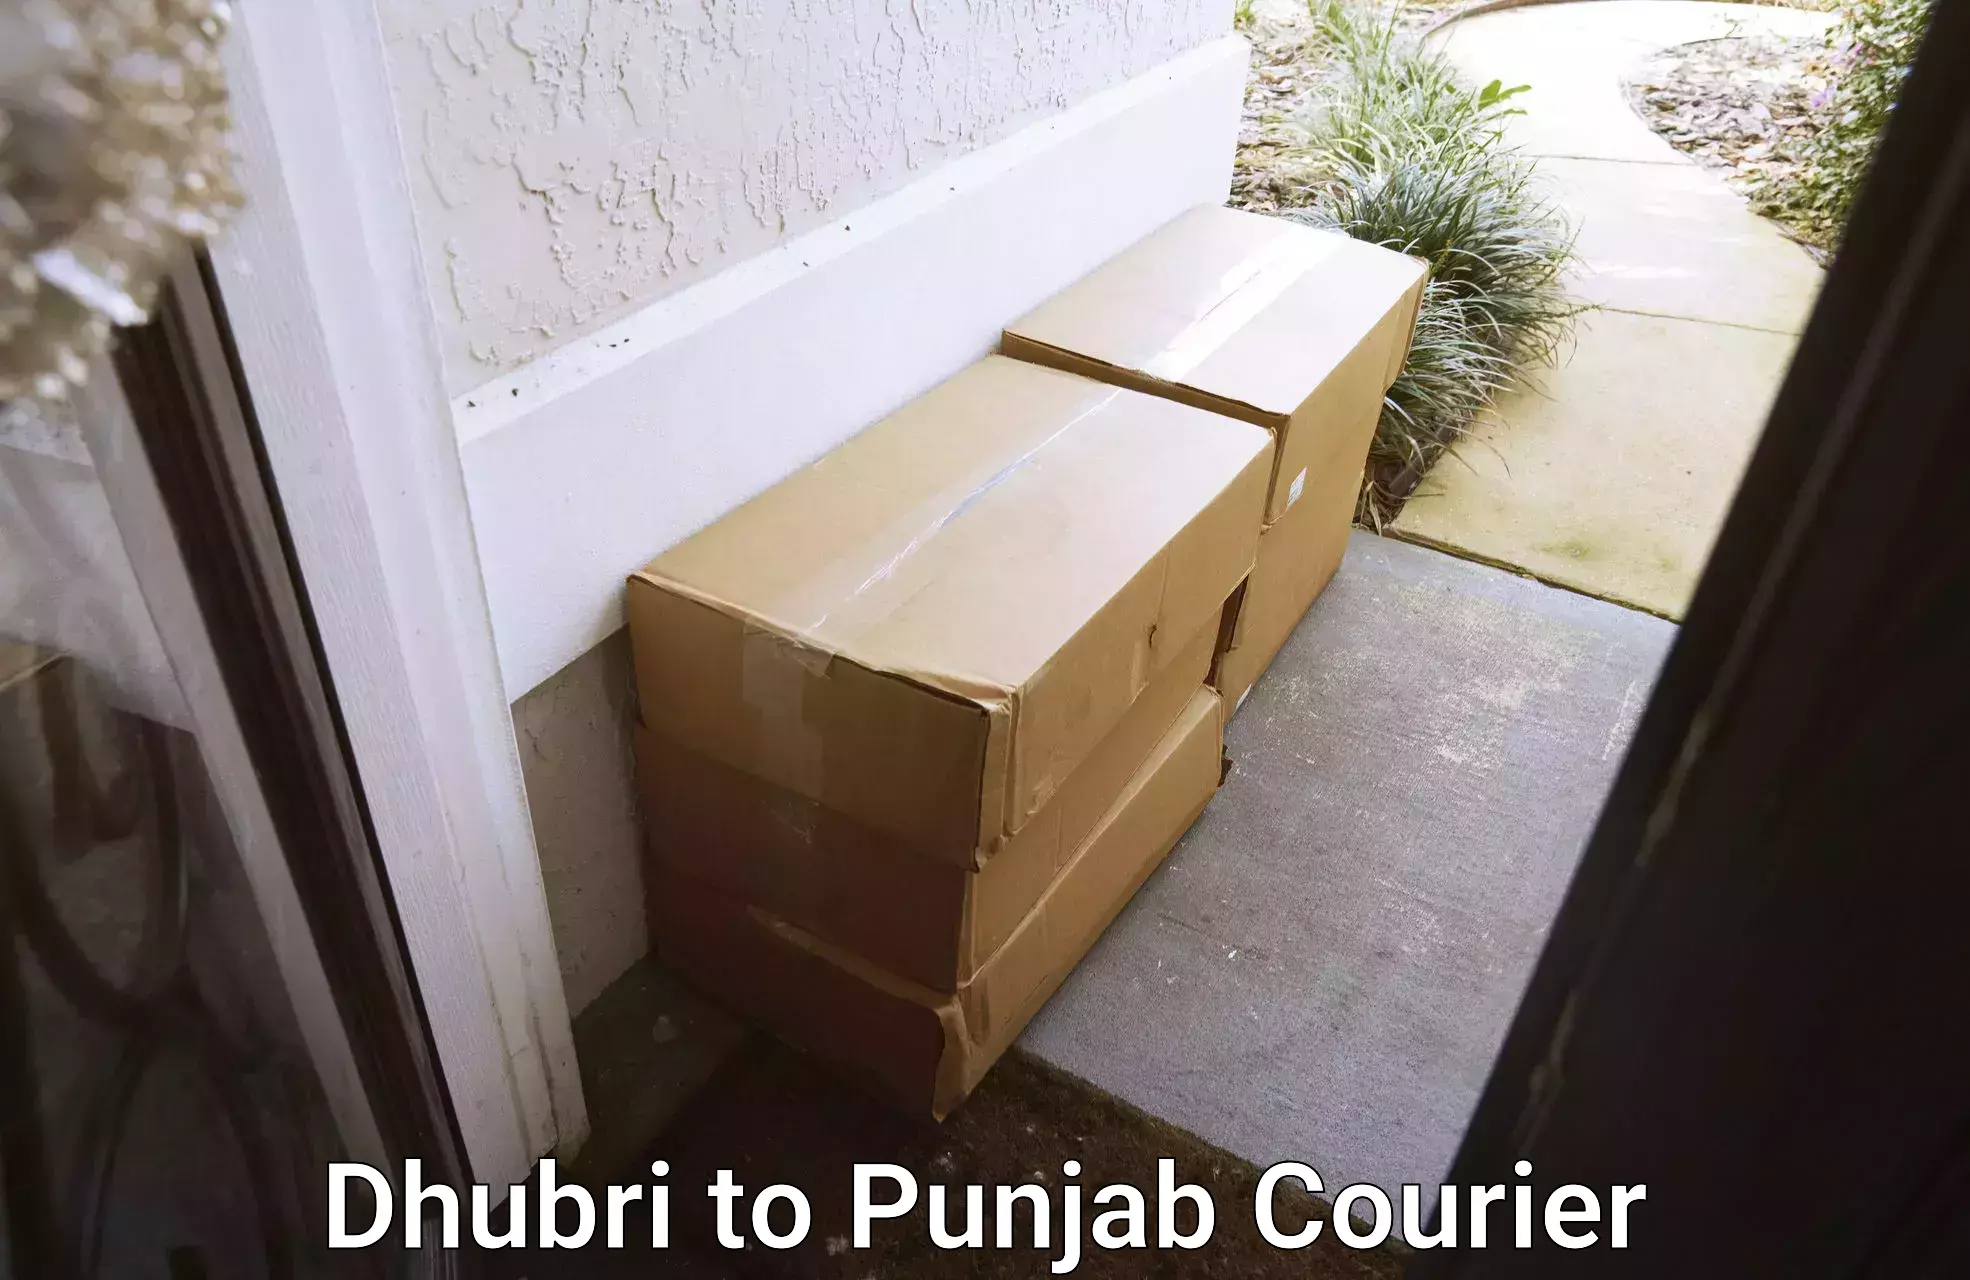 Round-the-clock parcel delivery Dhubri to Fatehgarh Sahib